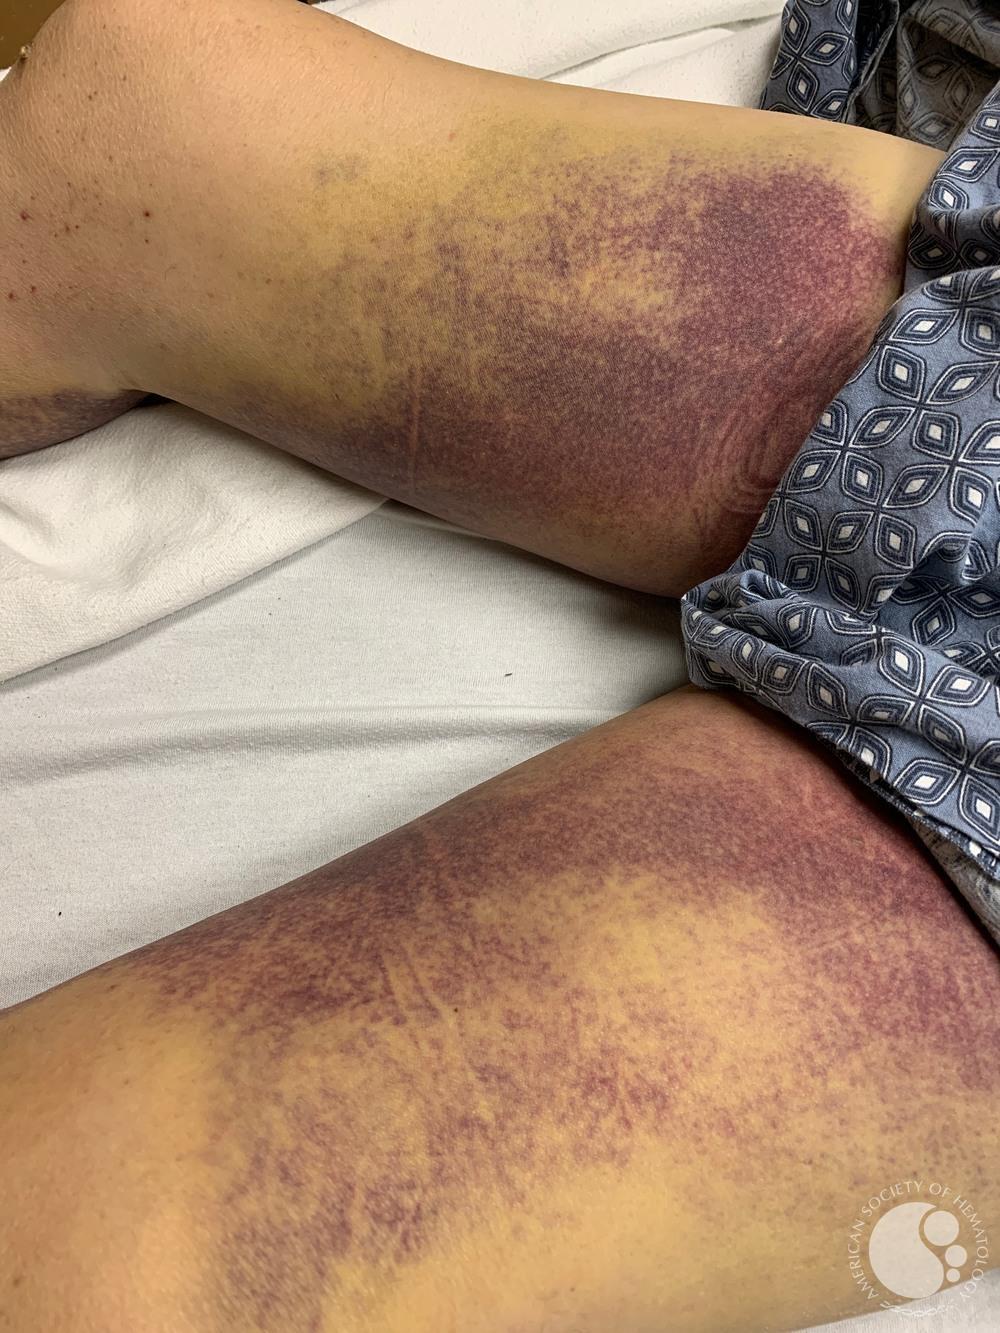 Spontaneous bruising in a middle aged male